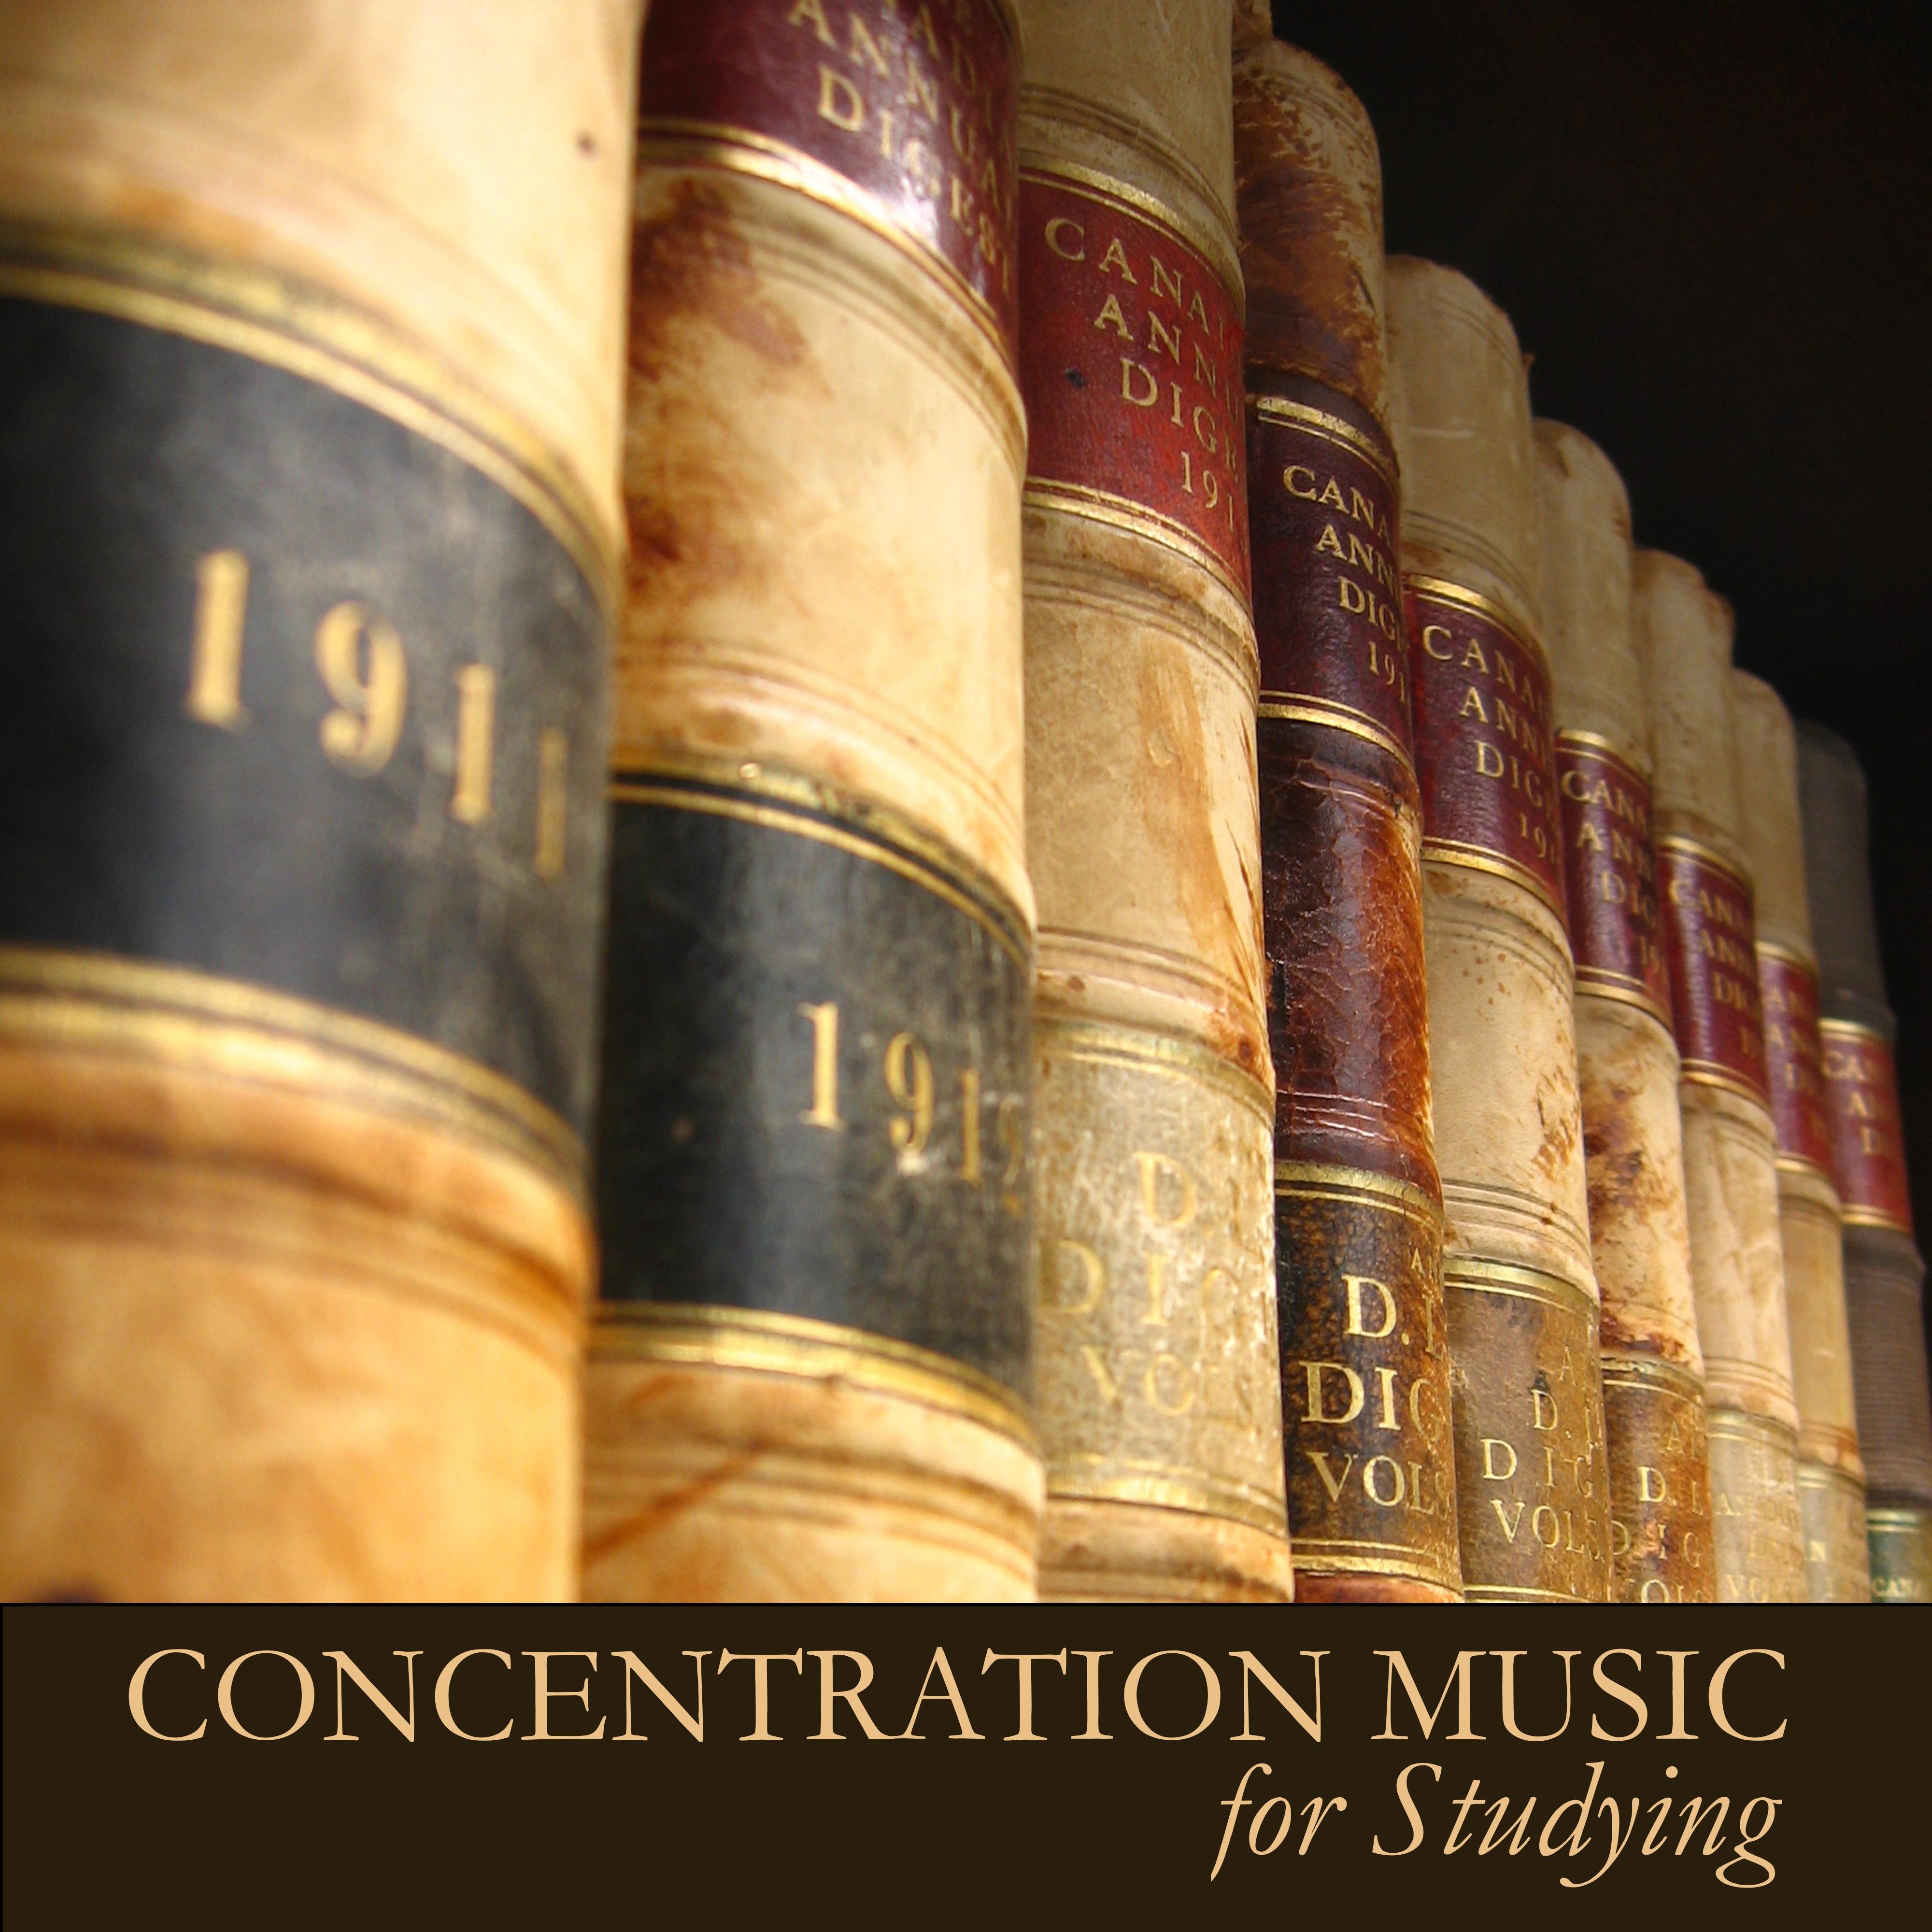 Concentration Music for Studying - Instrumental Study Music for Exam Study, to Focus on Learning, Improve Concentration and Brain Power